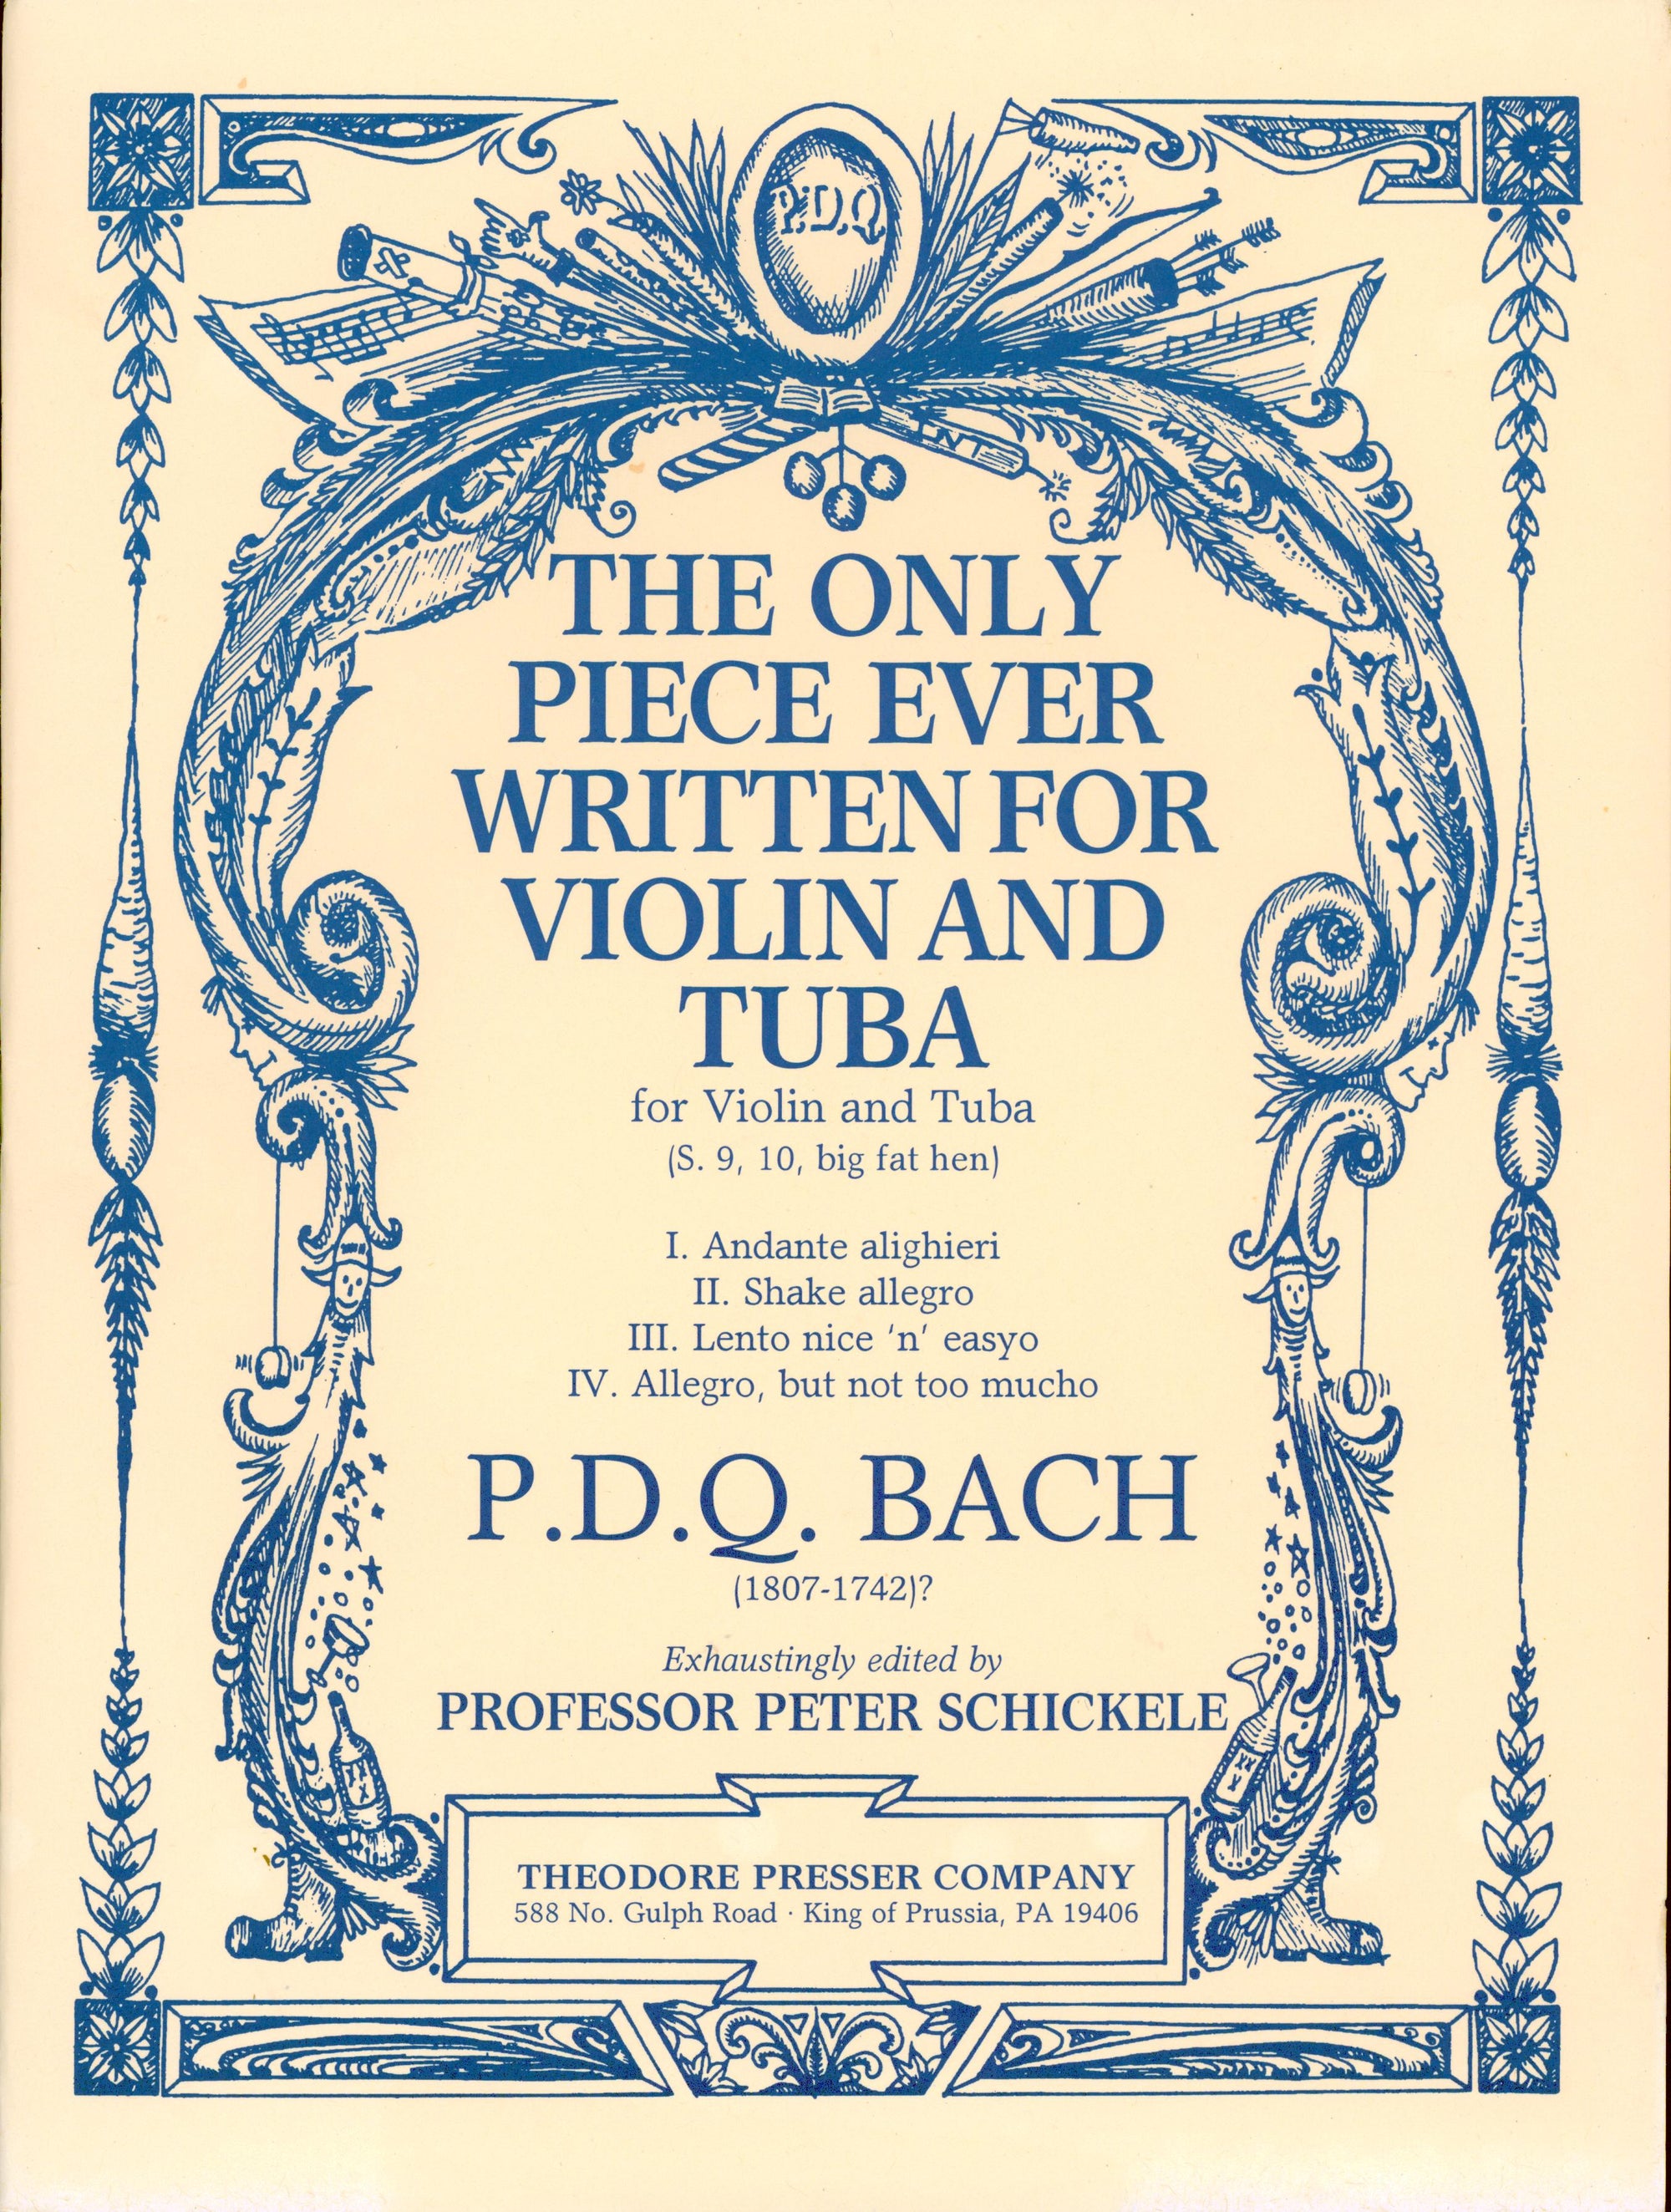 P.D.Q. Bach: The Only Piece Ever Written for Violin and Tuba